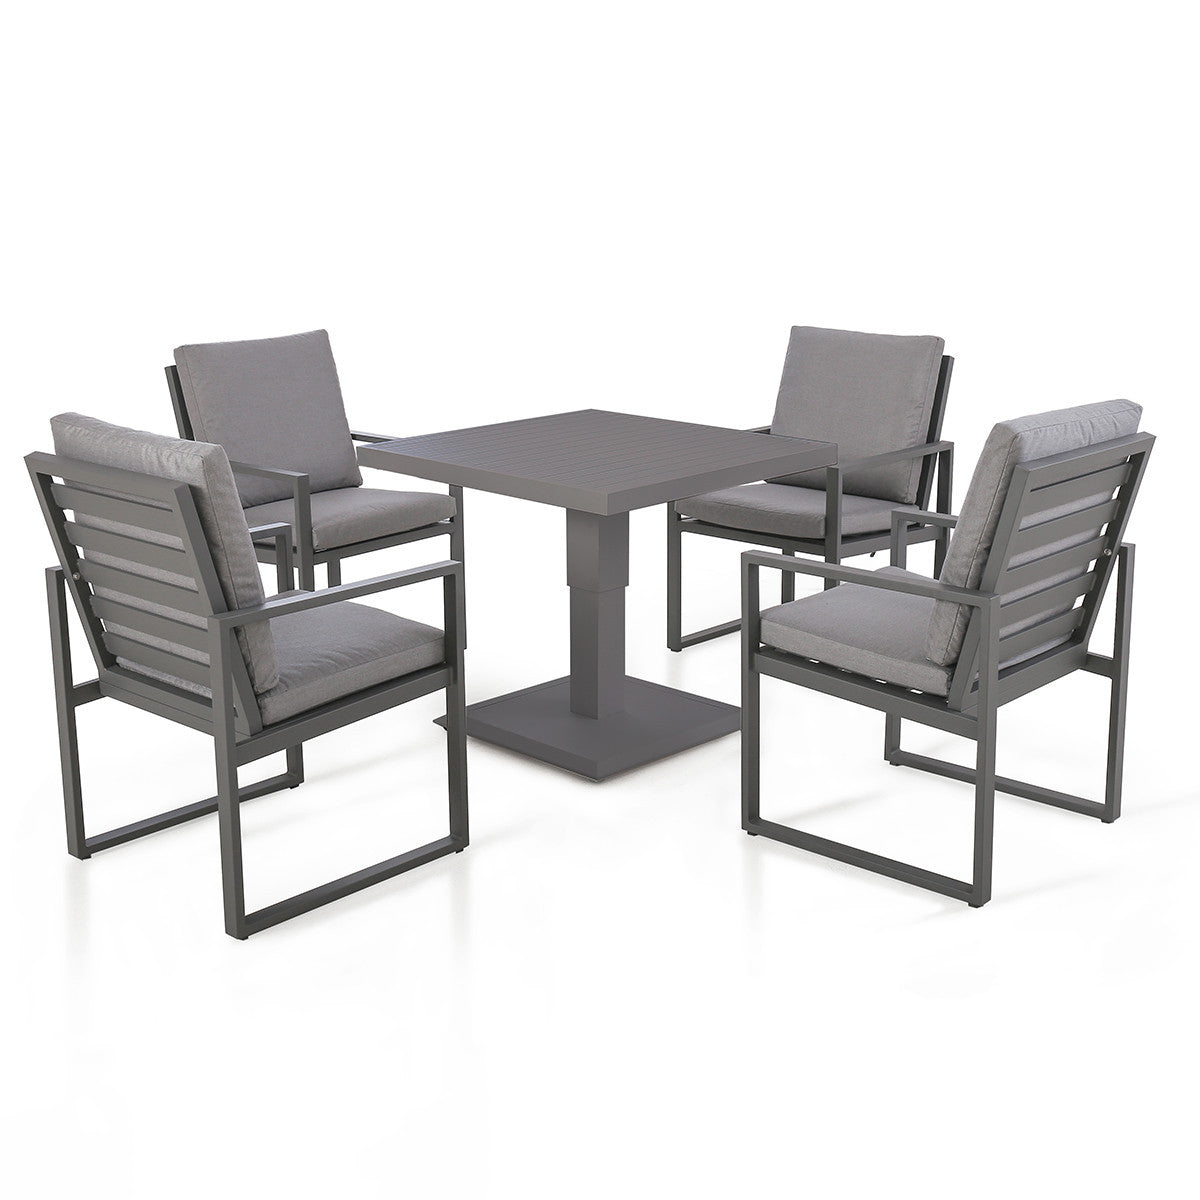 Amalfi 4 Seat Square Fabric Dining Set with Rising Table